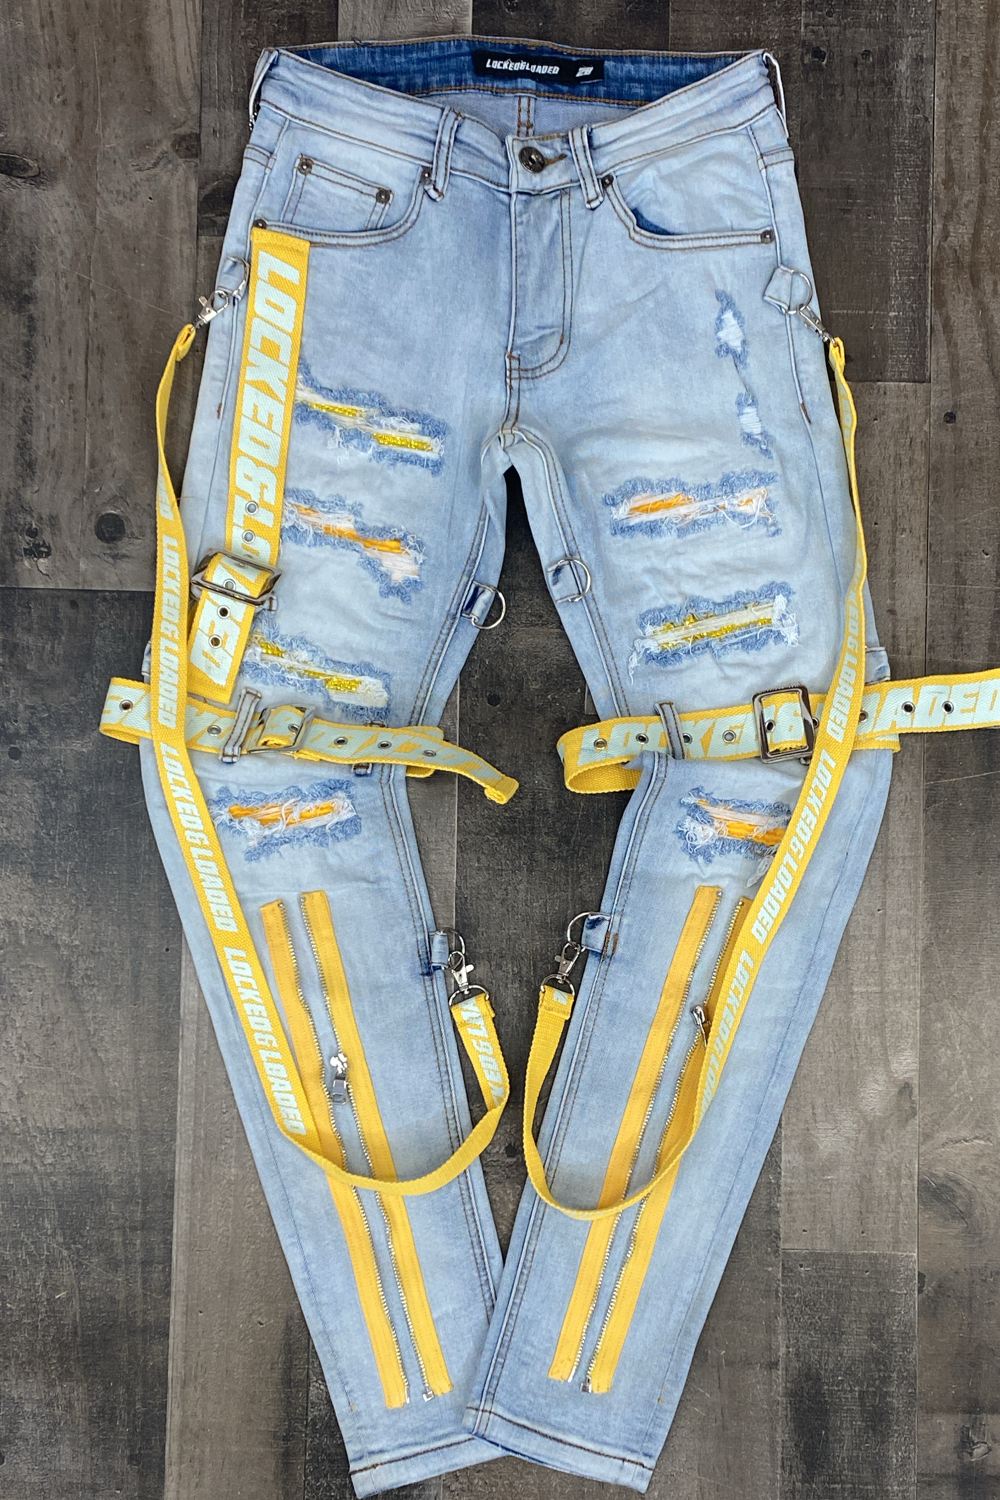 Locked Loaded- locked & loaded strapped studded jeans (light blue/yellow)